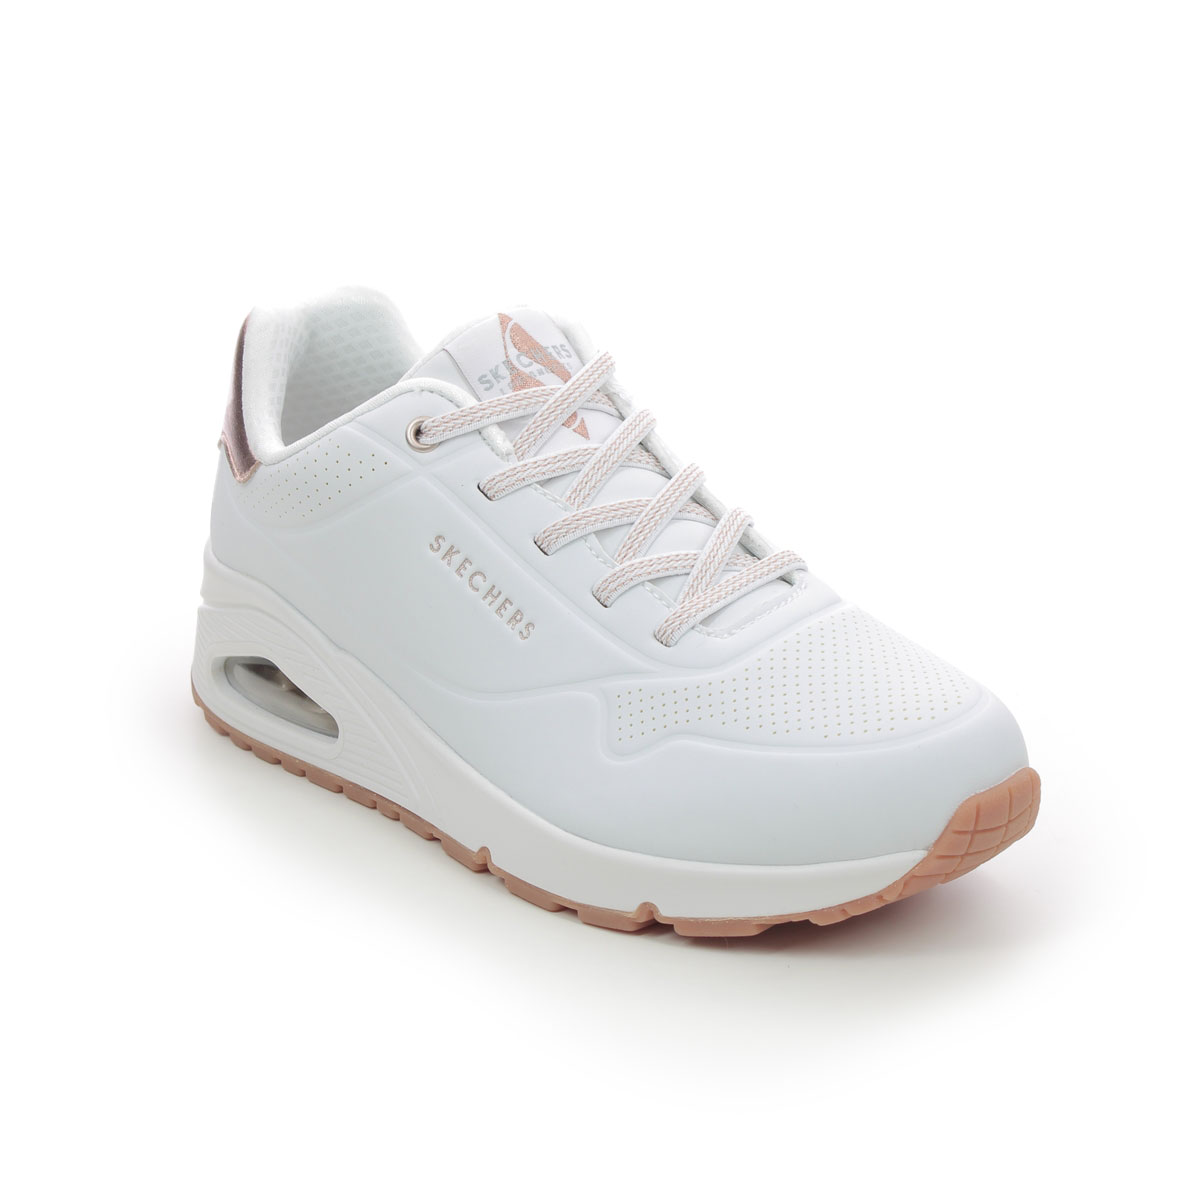 Skechers Uno WHT White Womens trainers 155196 in a Plain Man-made in Size 4.5